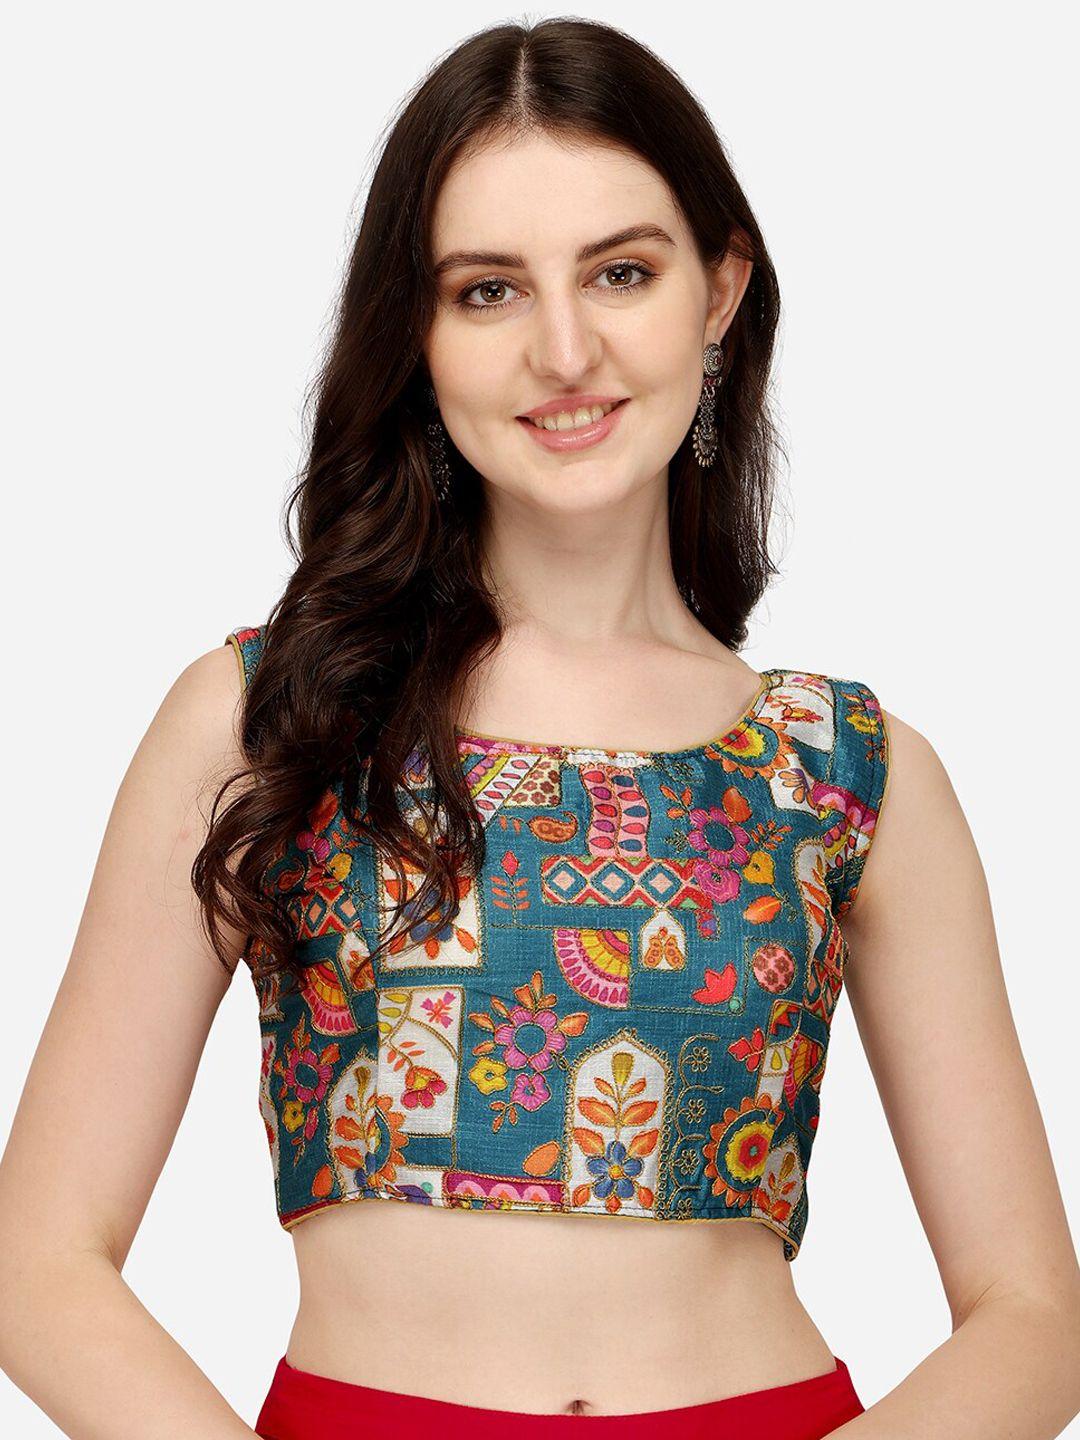 pujia mills women turquoise blue digital printed embroidered saree blouse